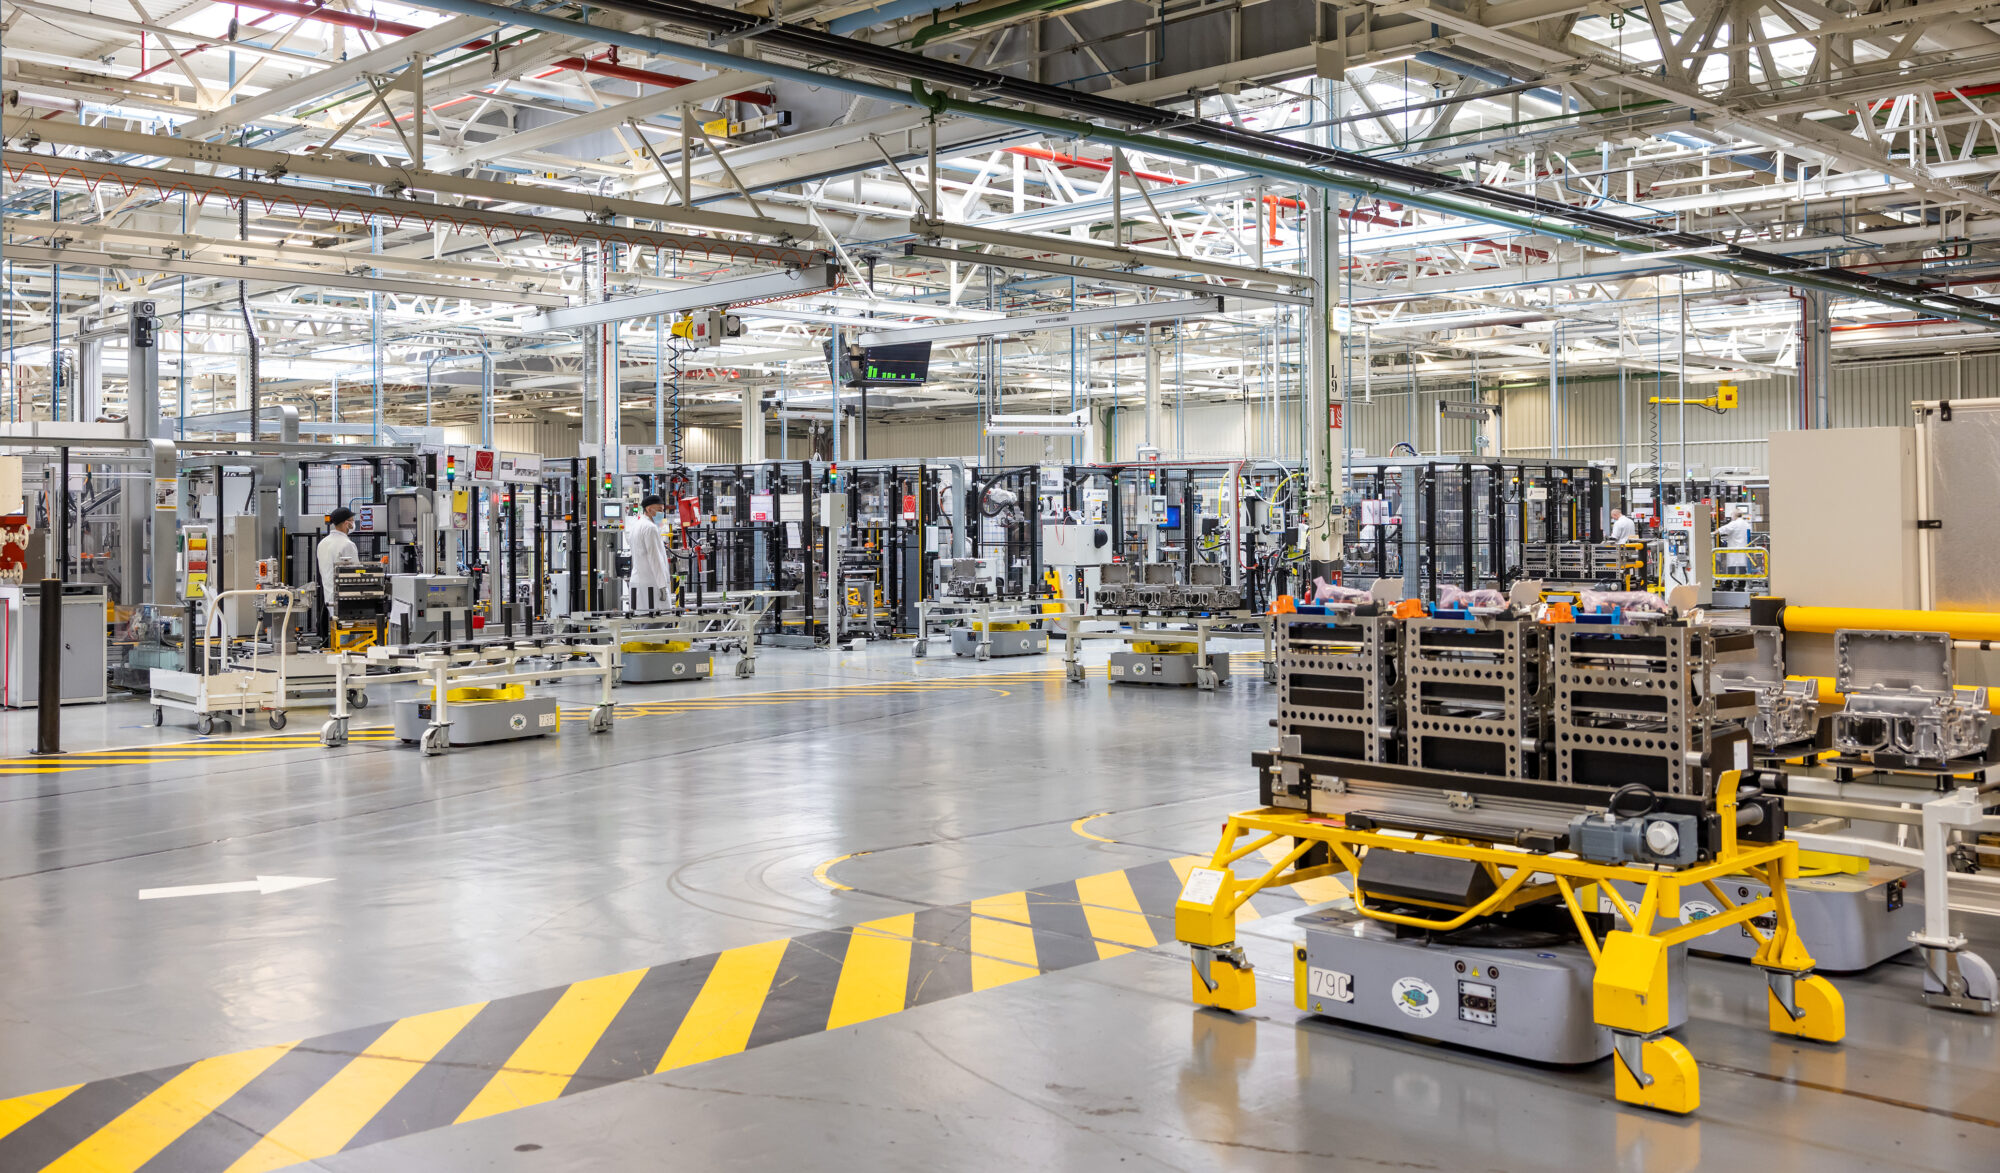 Renault Group reduces its industrial energy consumption